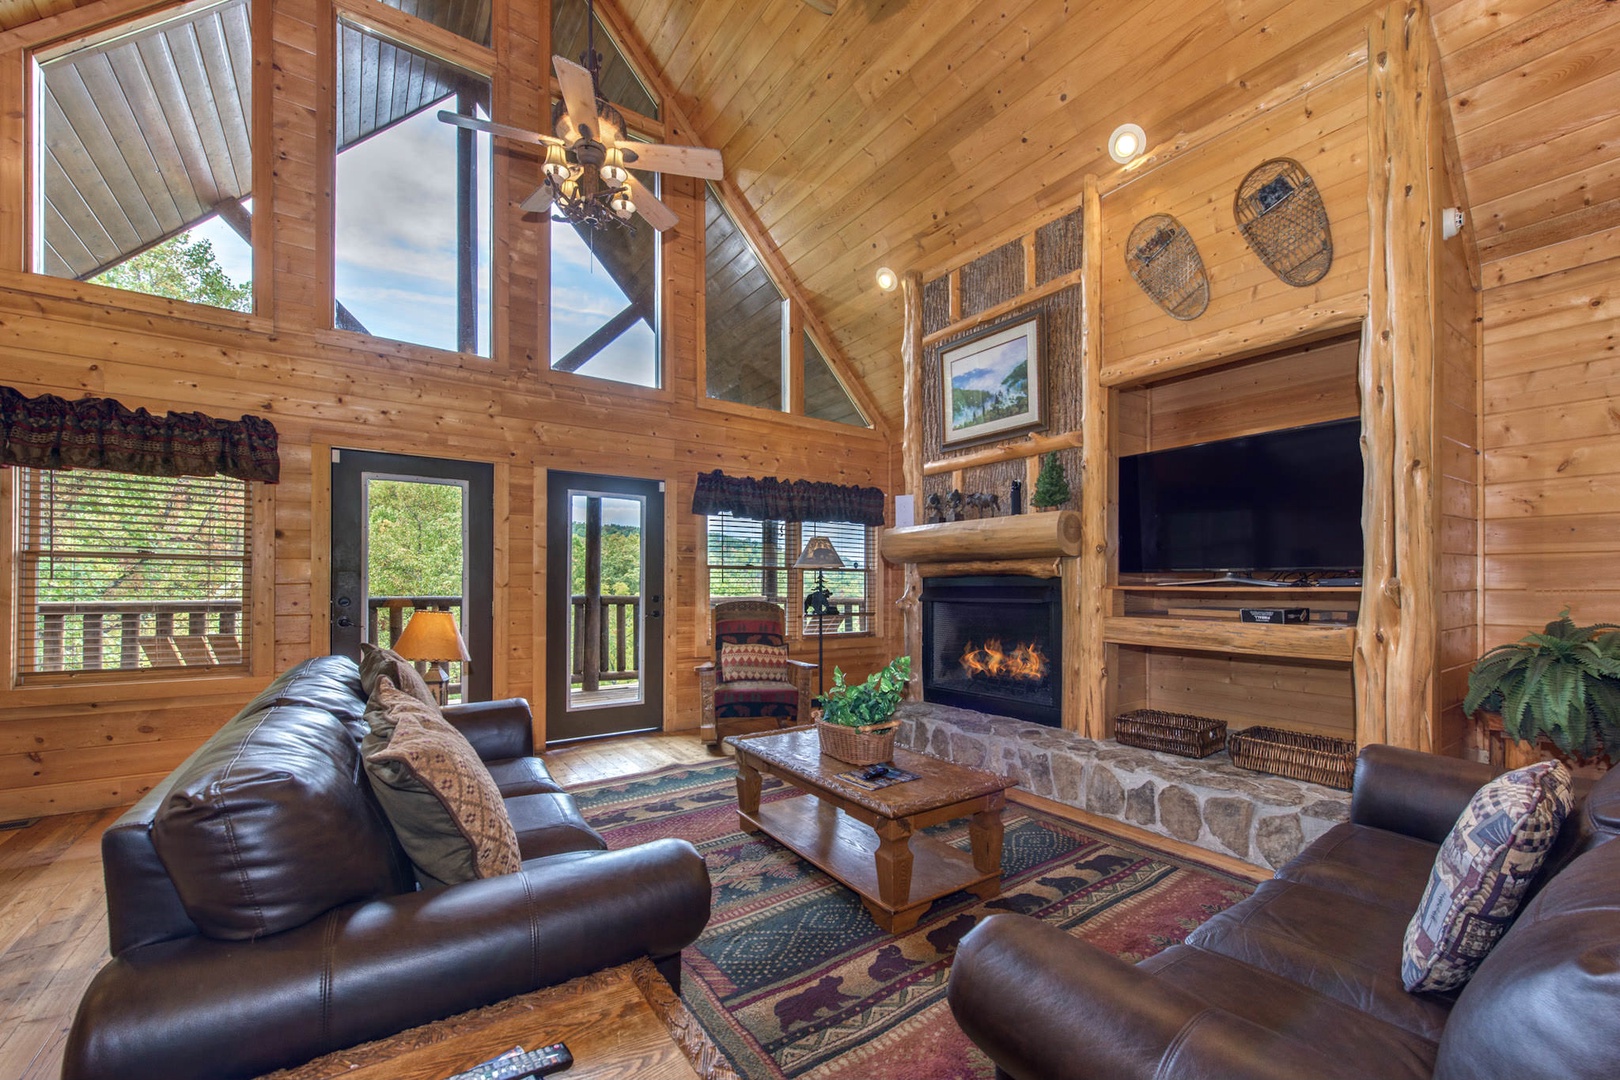 Spacious living room with ample seating, gas fireplace, Smart TV, and deck access